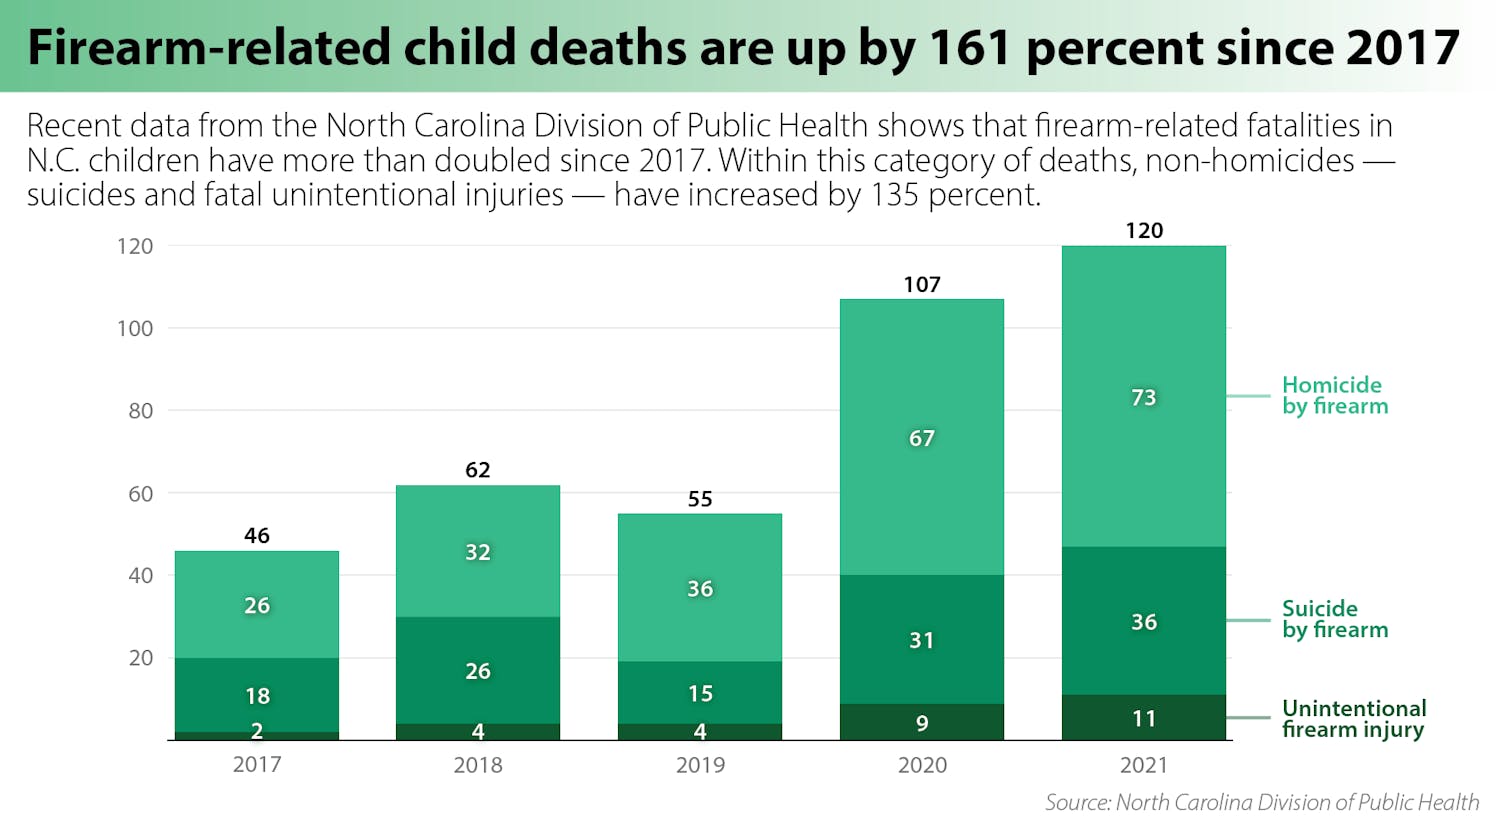 Firearm-related child deaths are up by 161 percent since 2017